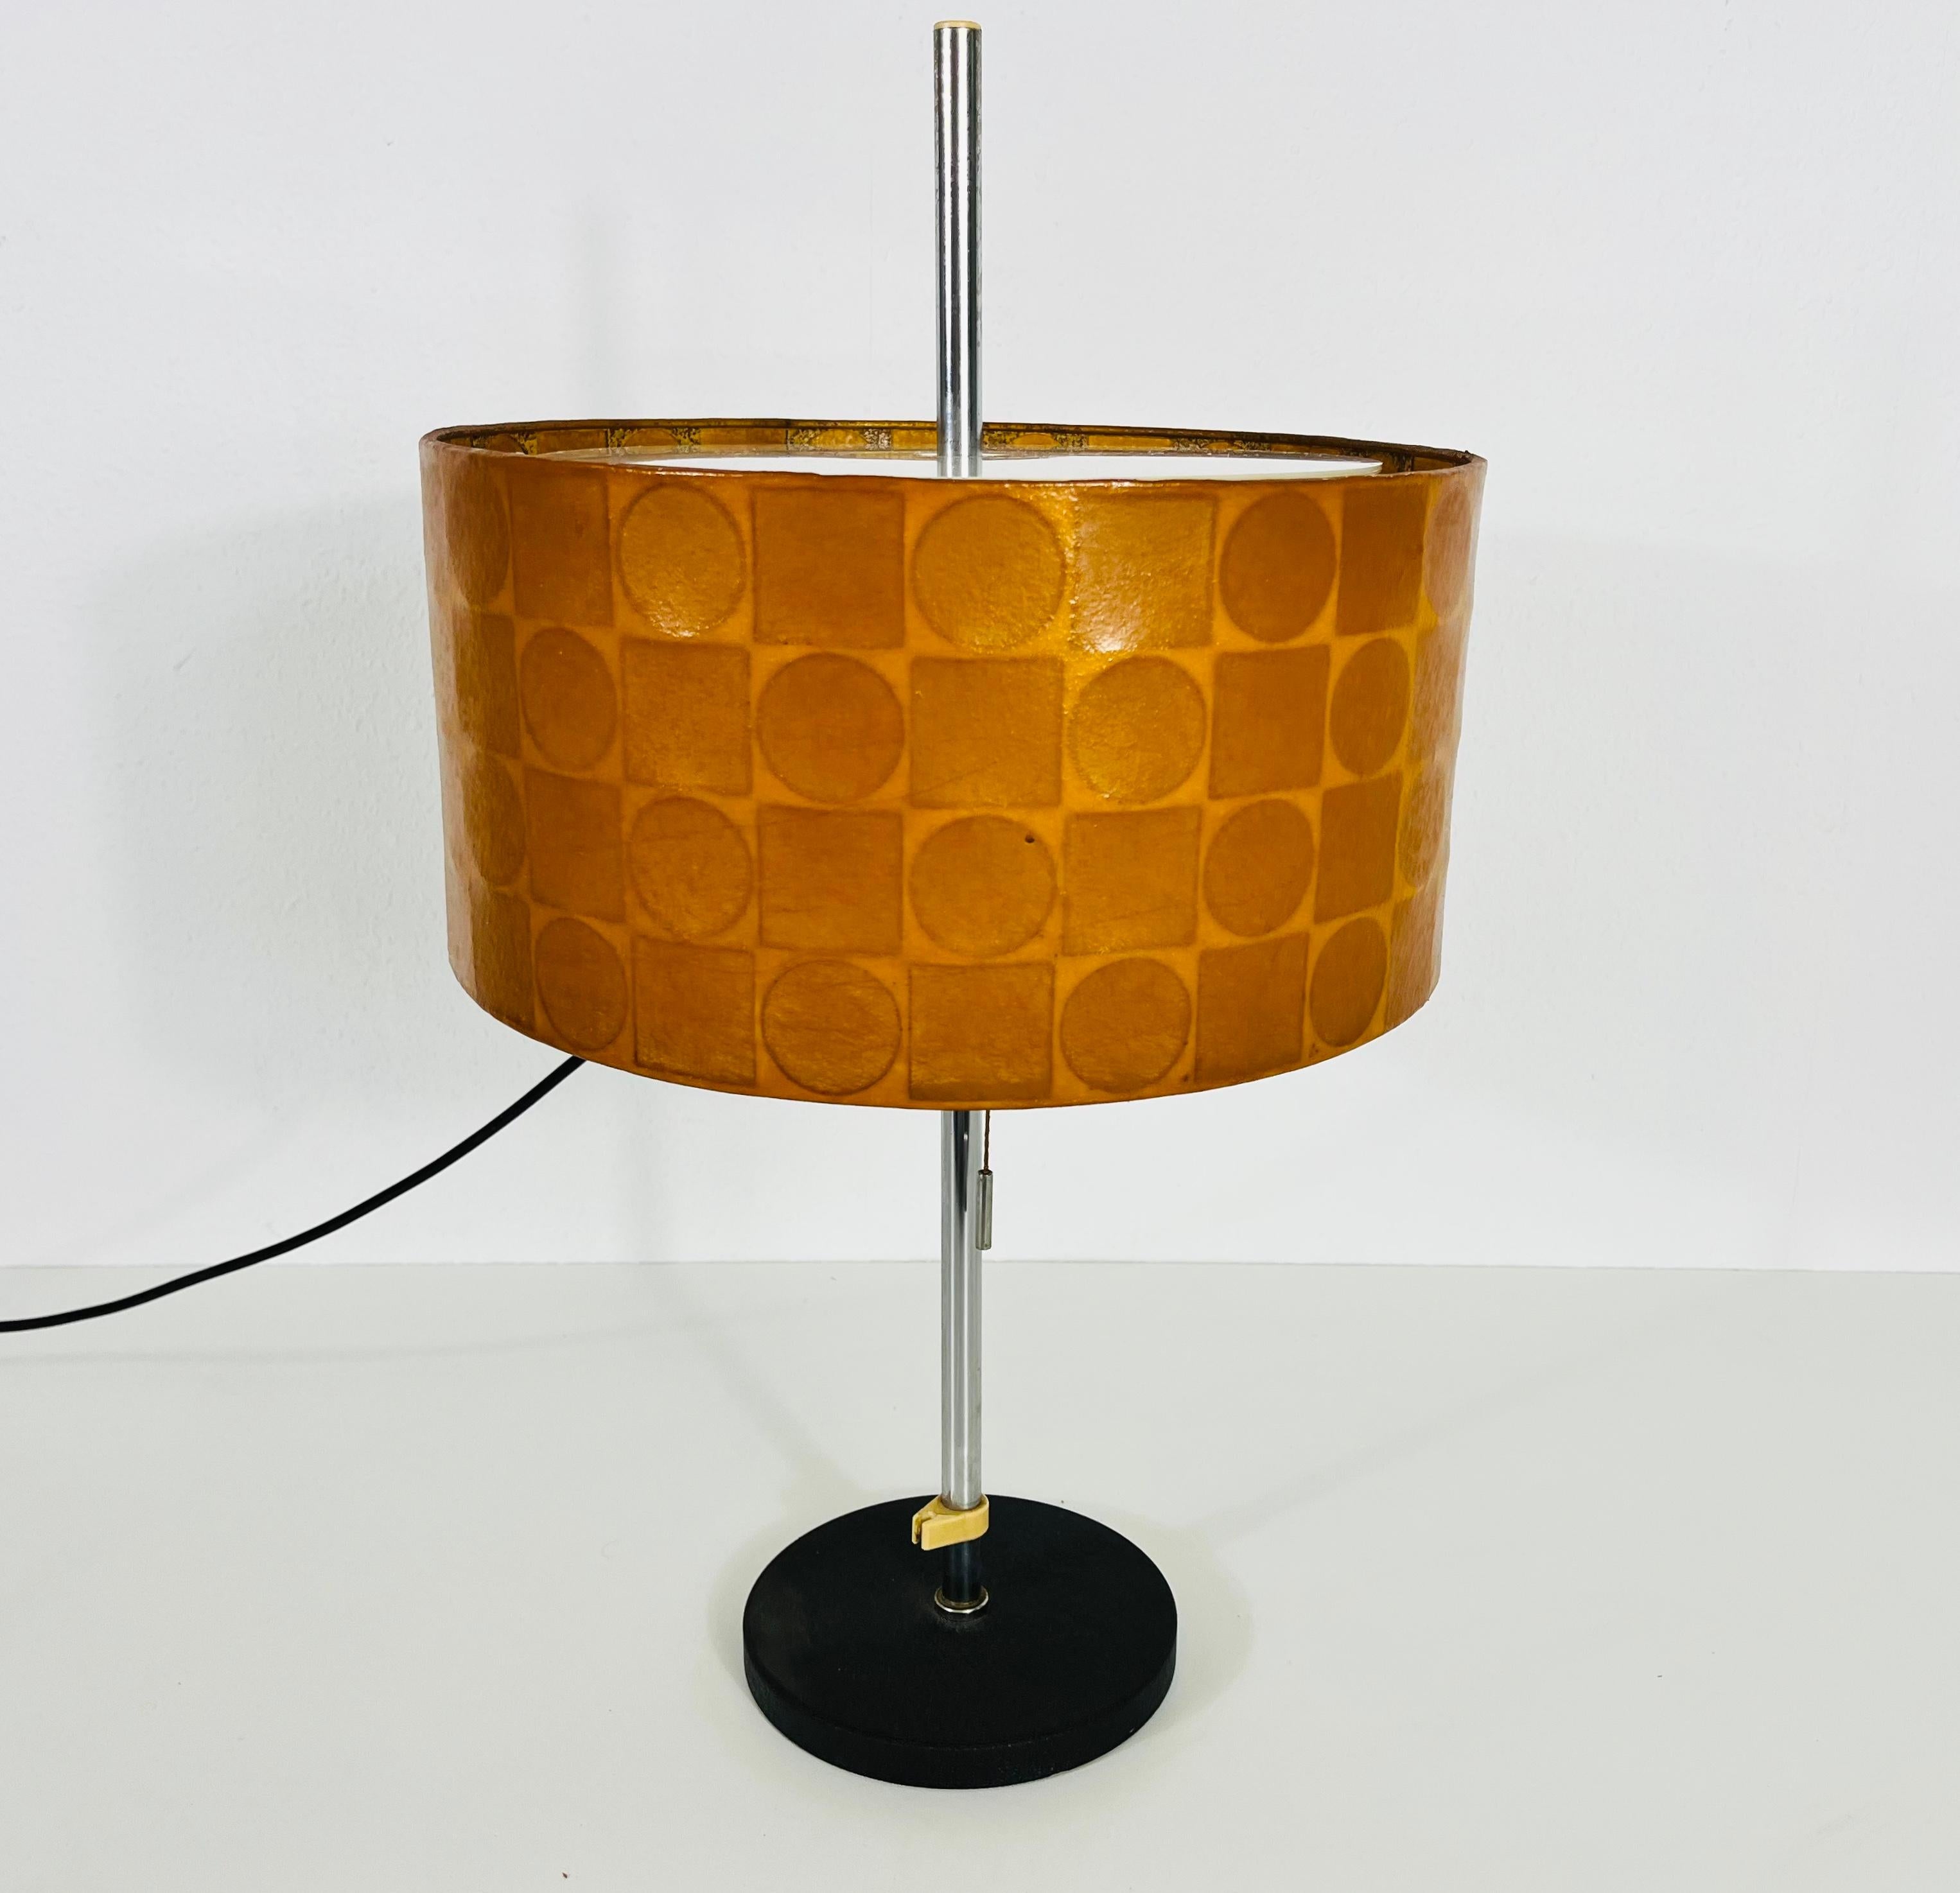 Cocoon table lamp made in Germany by Goldkantin the 1960s. The lamp shade is made of cocoon and has a beautiful shape. 

The light requires one E27 (US E26) light bulb. Works with both 120/220V. Good vintage condition.

Free worldwide express